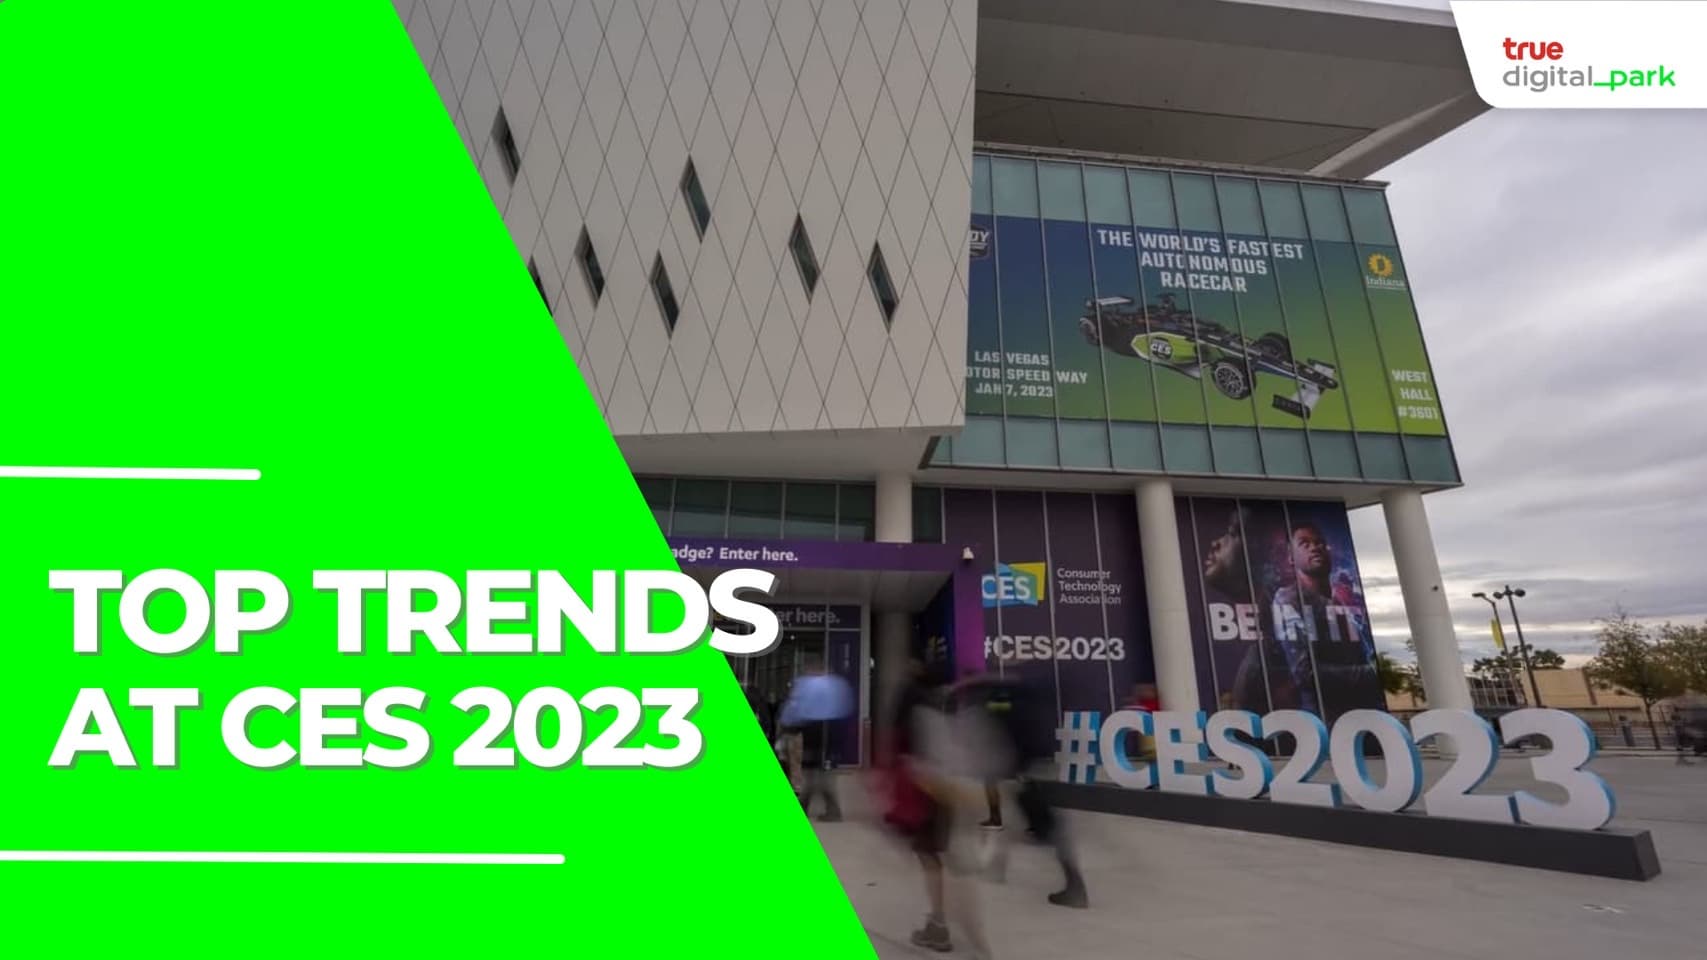 Top Trends at CES 2023